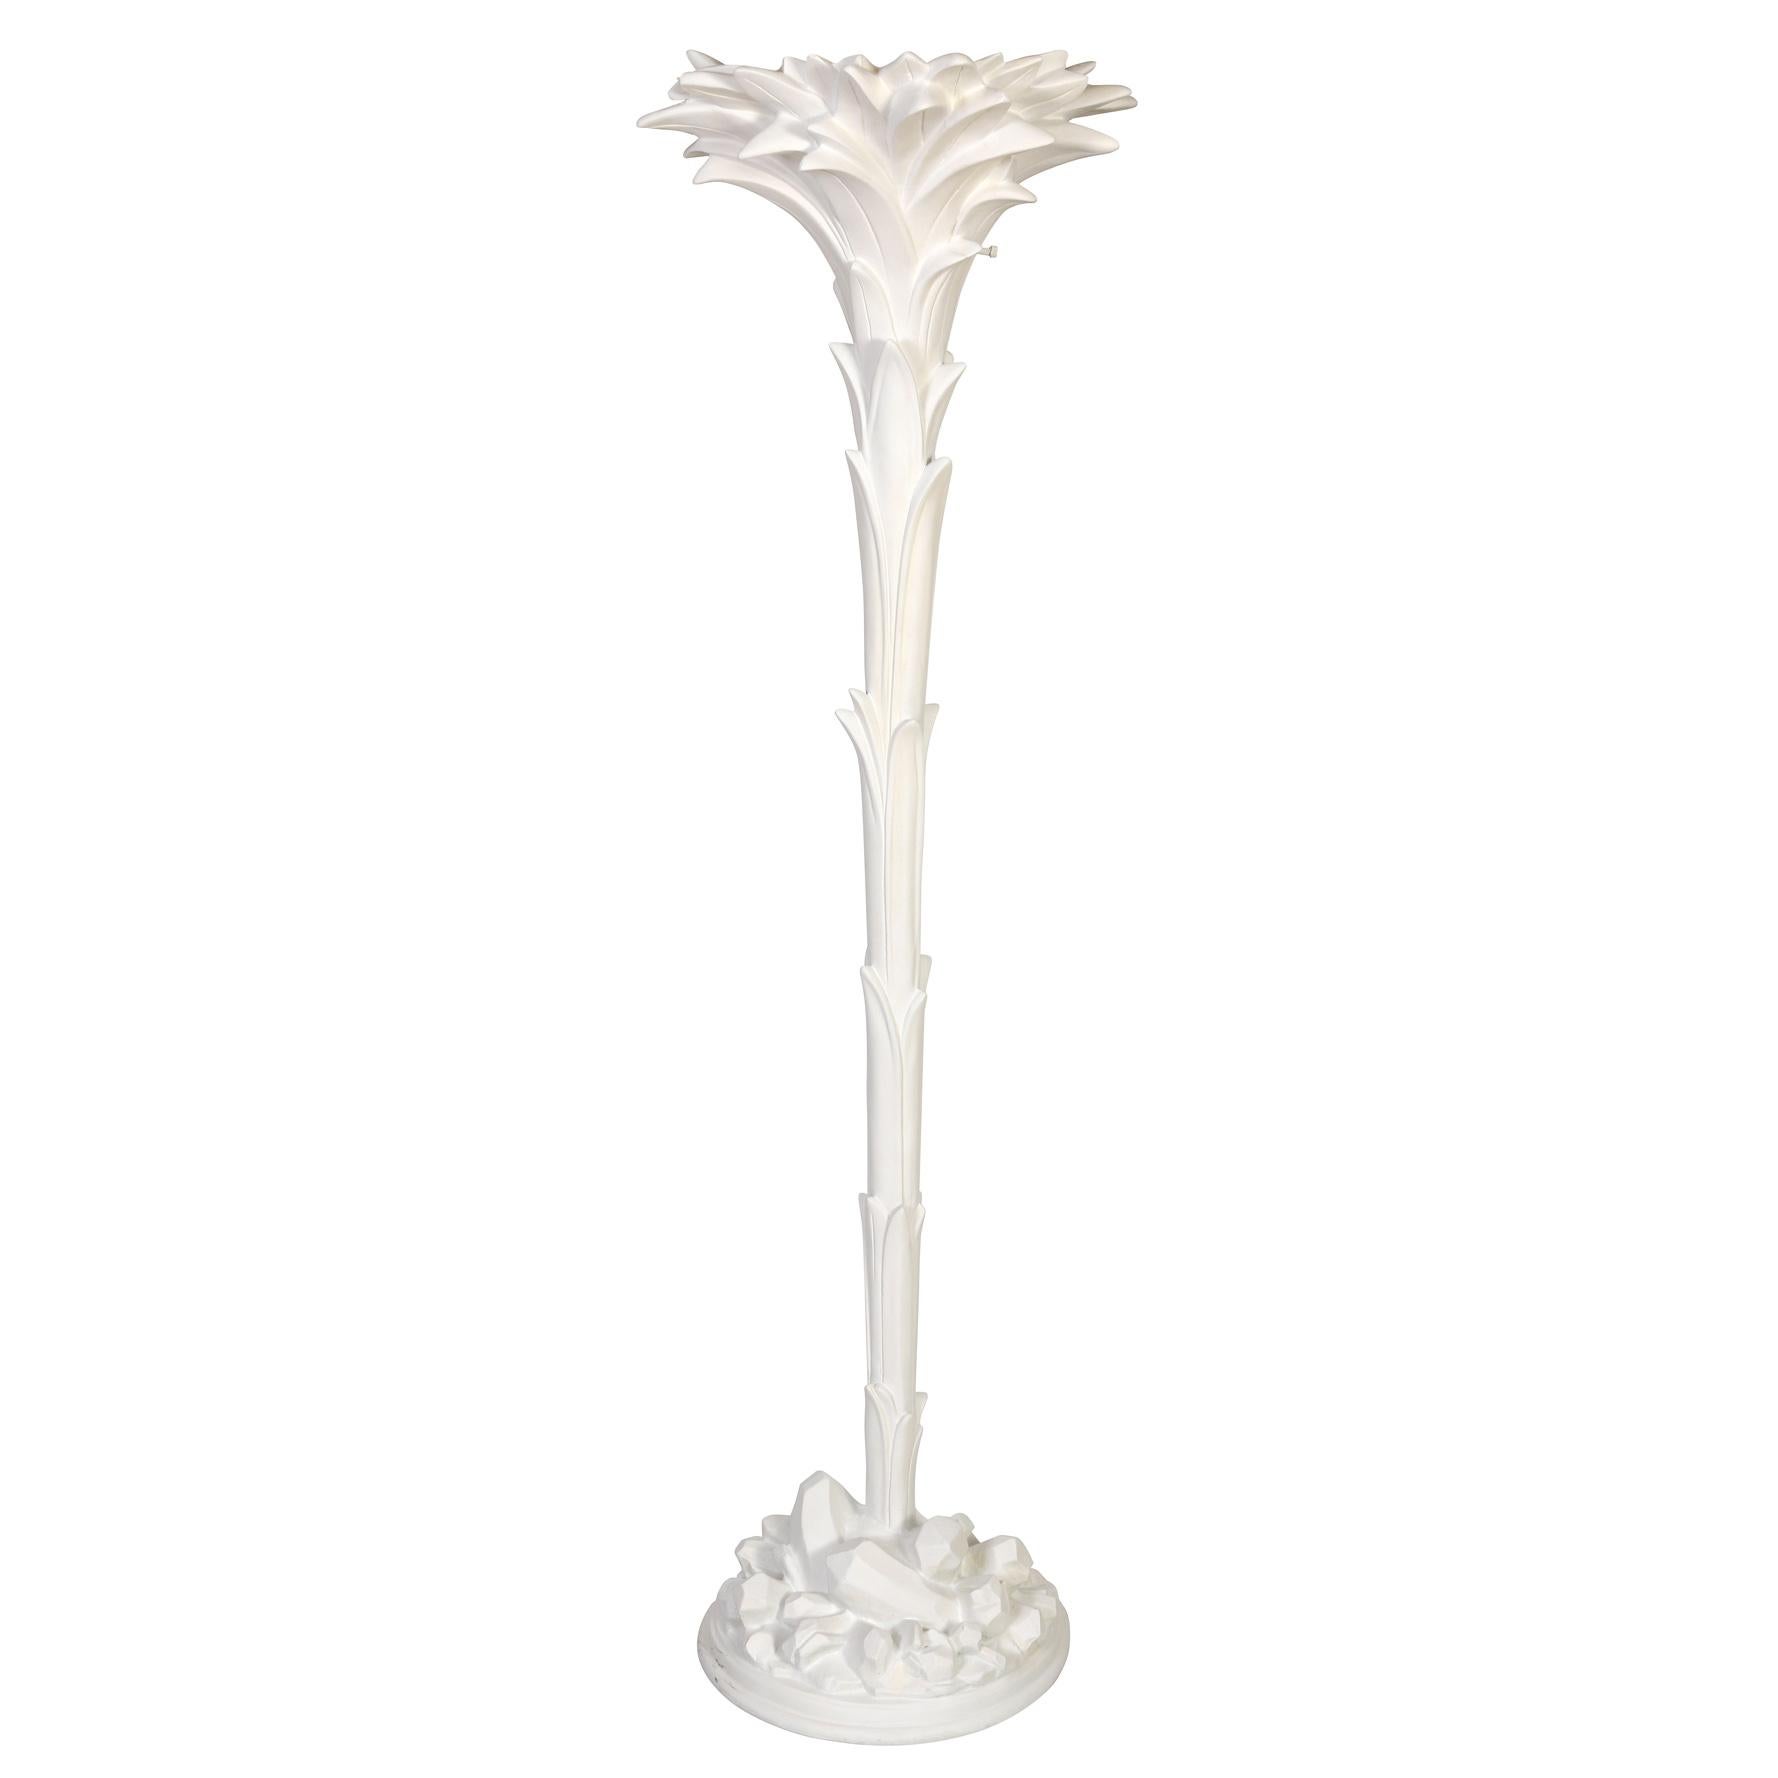 A glamorous pair of Serge Roche style, white palm leaf torchières that effortlessly blend elegant opulence with tropical allure. These exquisite floor lamps seamlessly marry sophistication with a touch of natural splendor, promising to be the